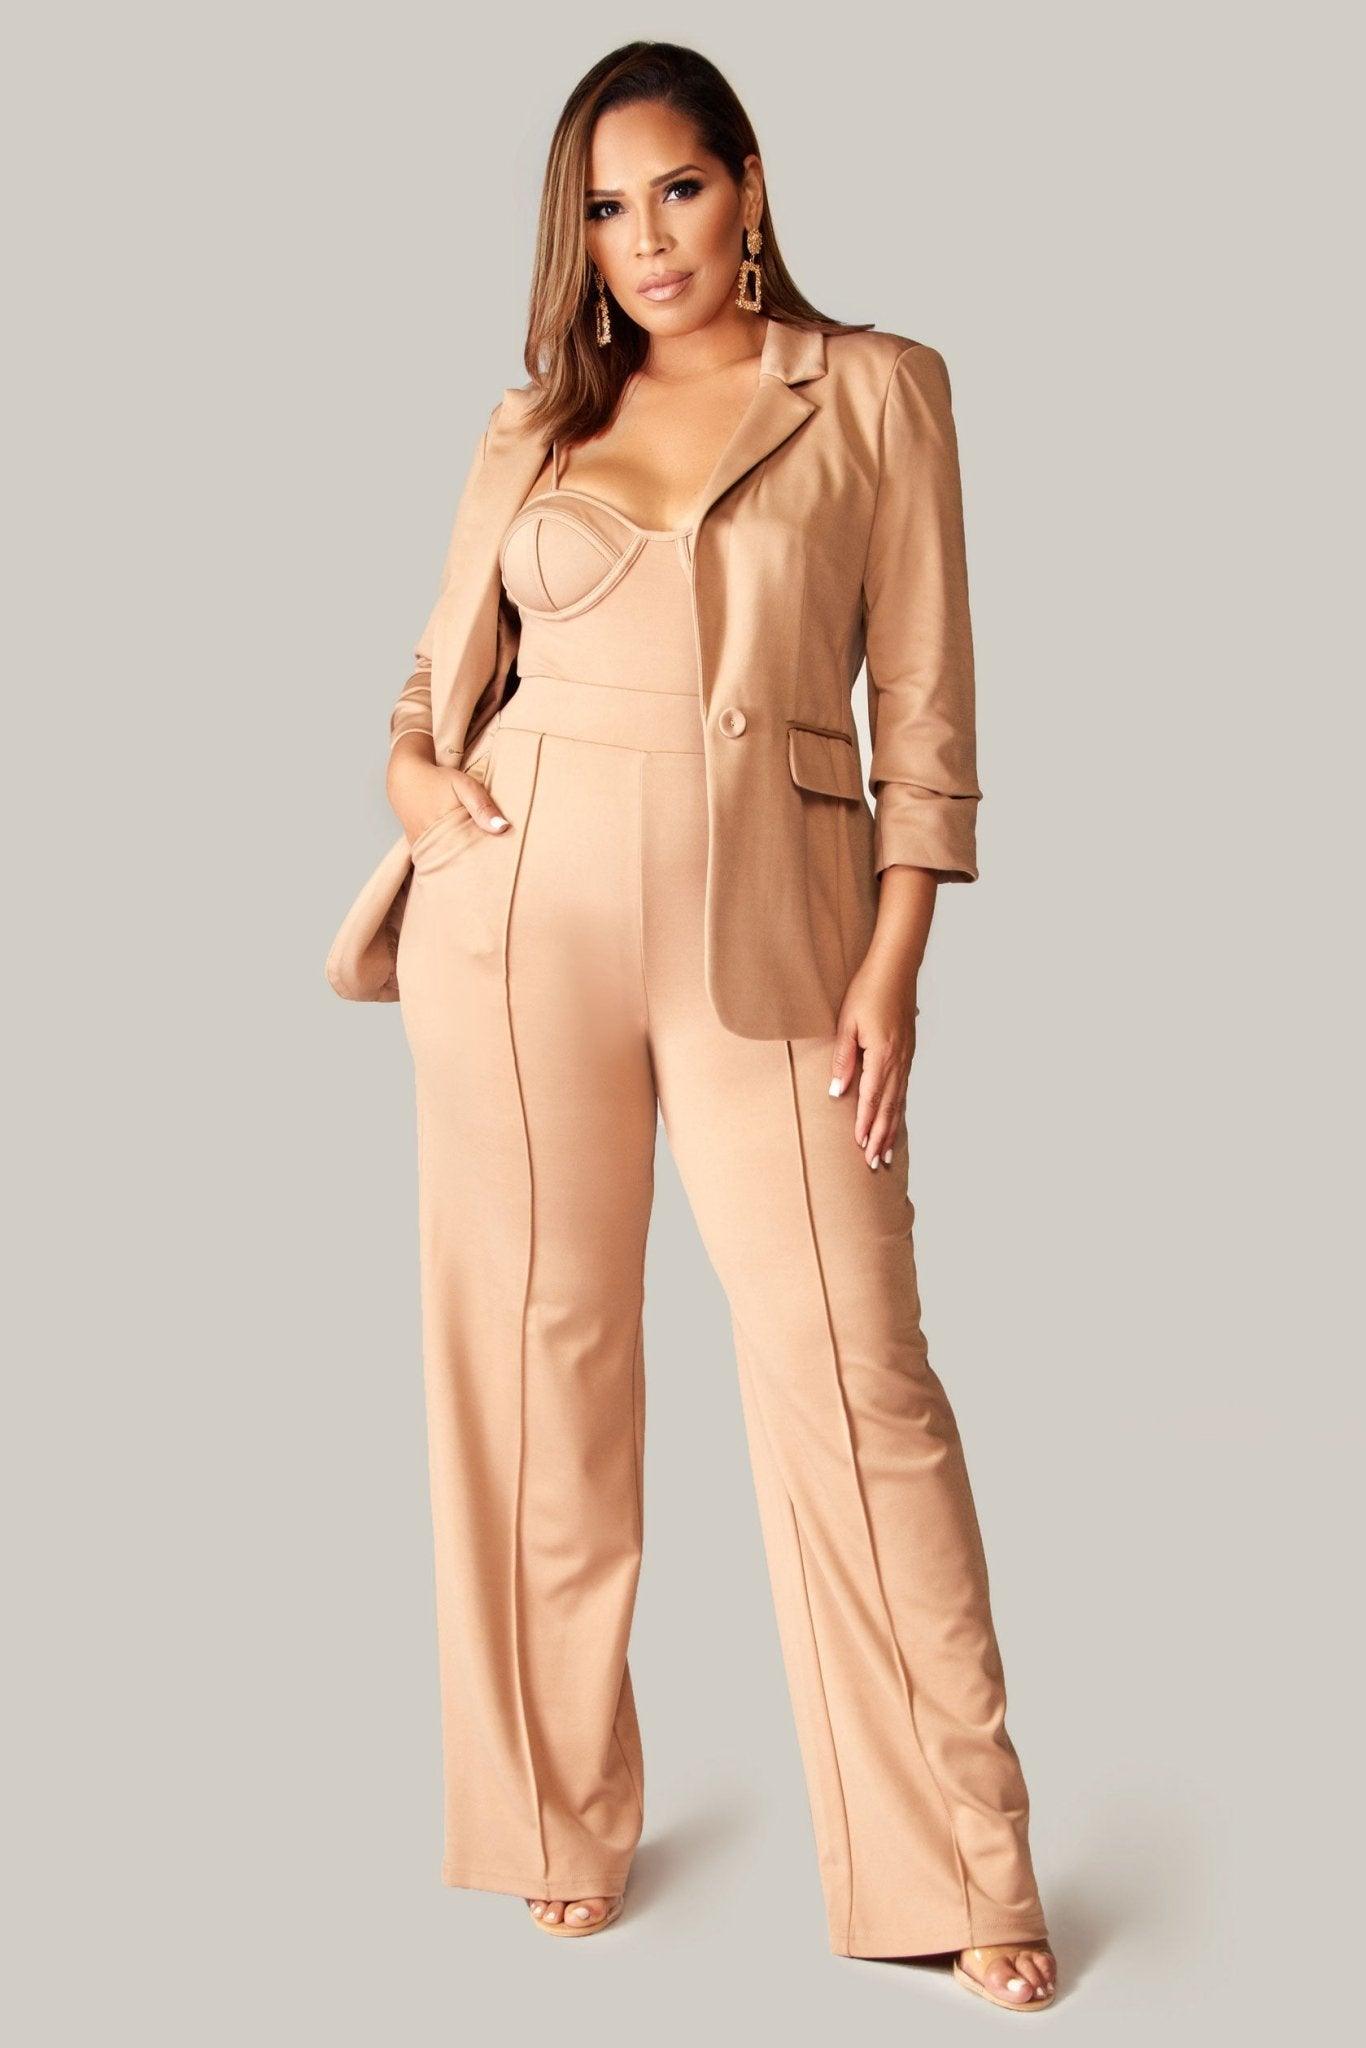 Vada High Couture 3 PC Blazer Set - MY SEXY STYLES